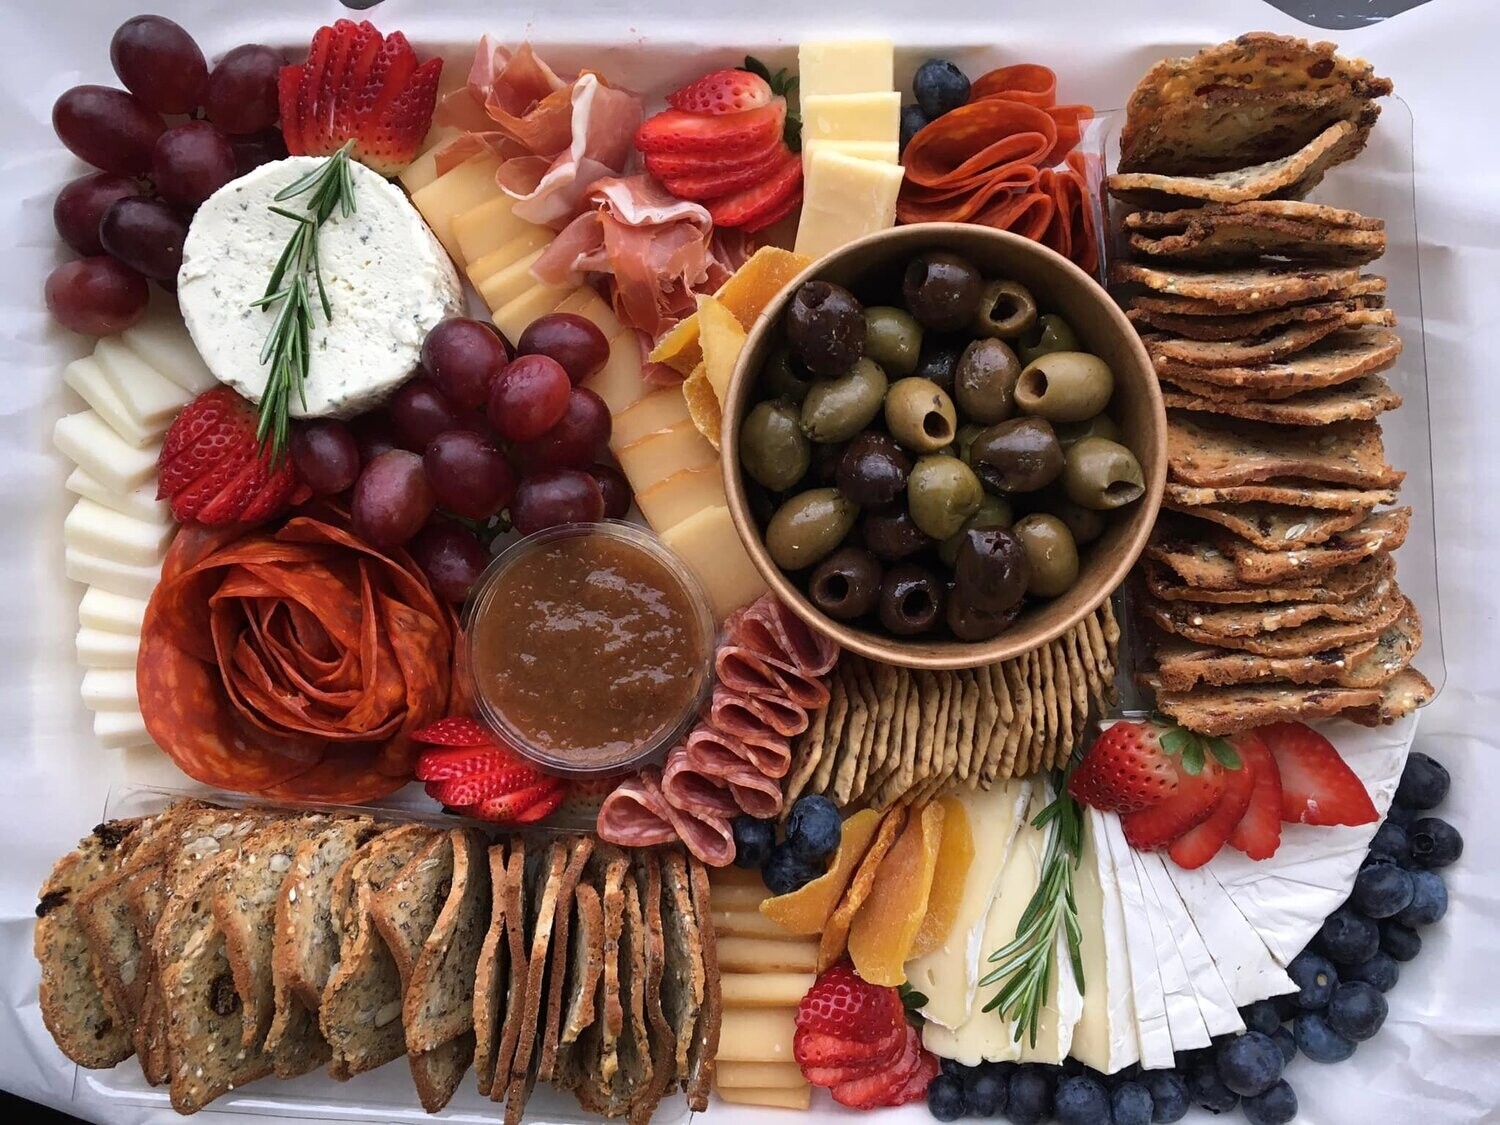 Charcuterie Board - 3 Sizes Vegan Options Available  $ave $3 off